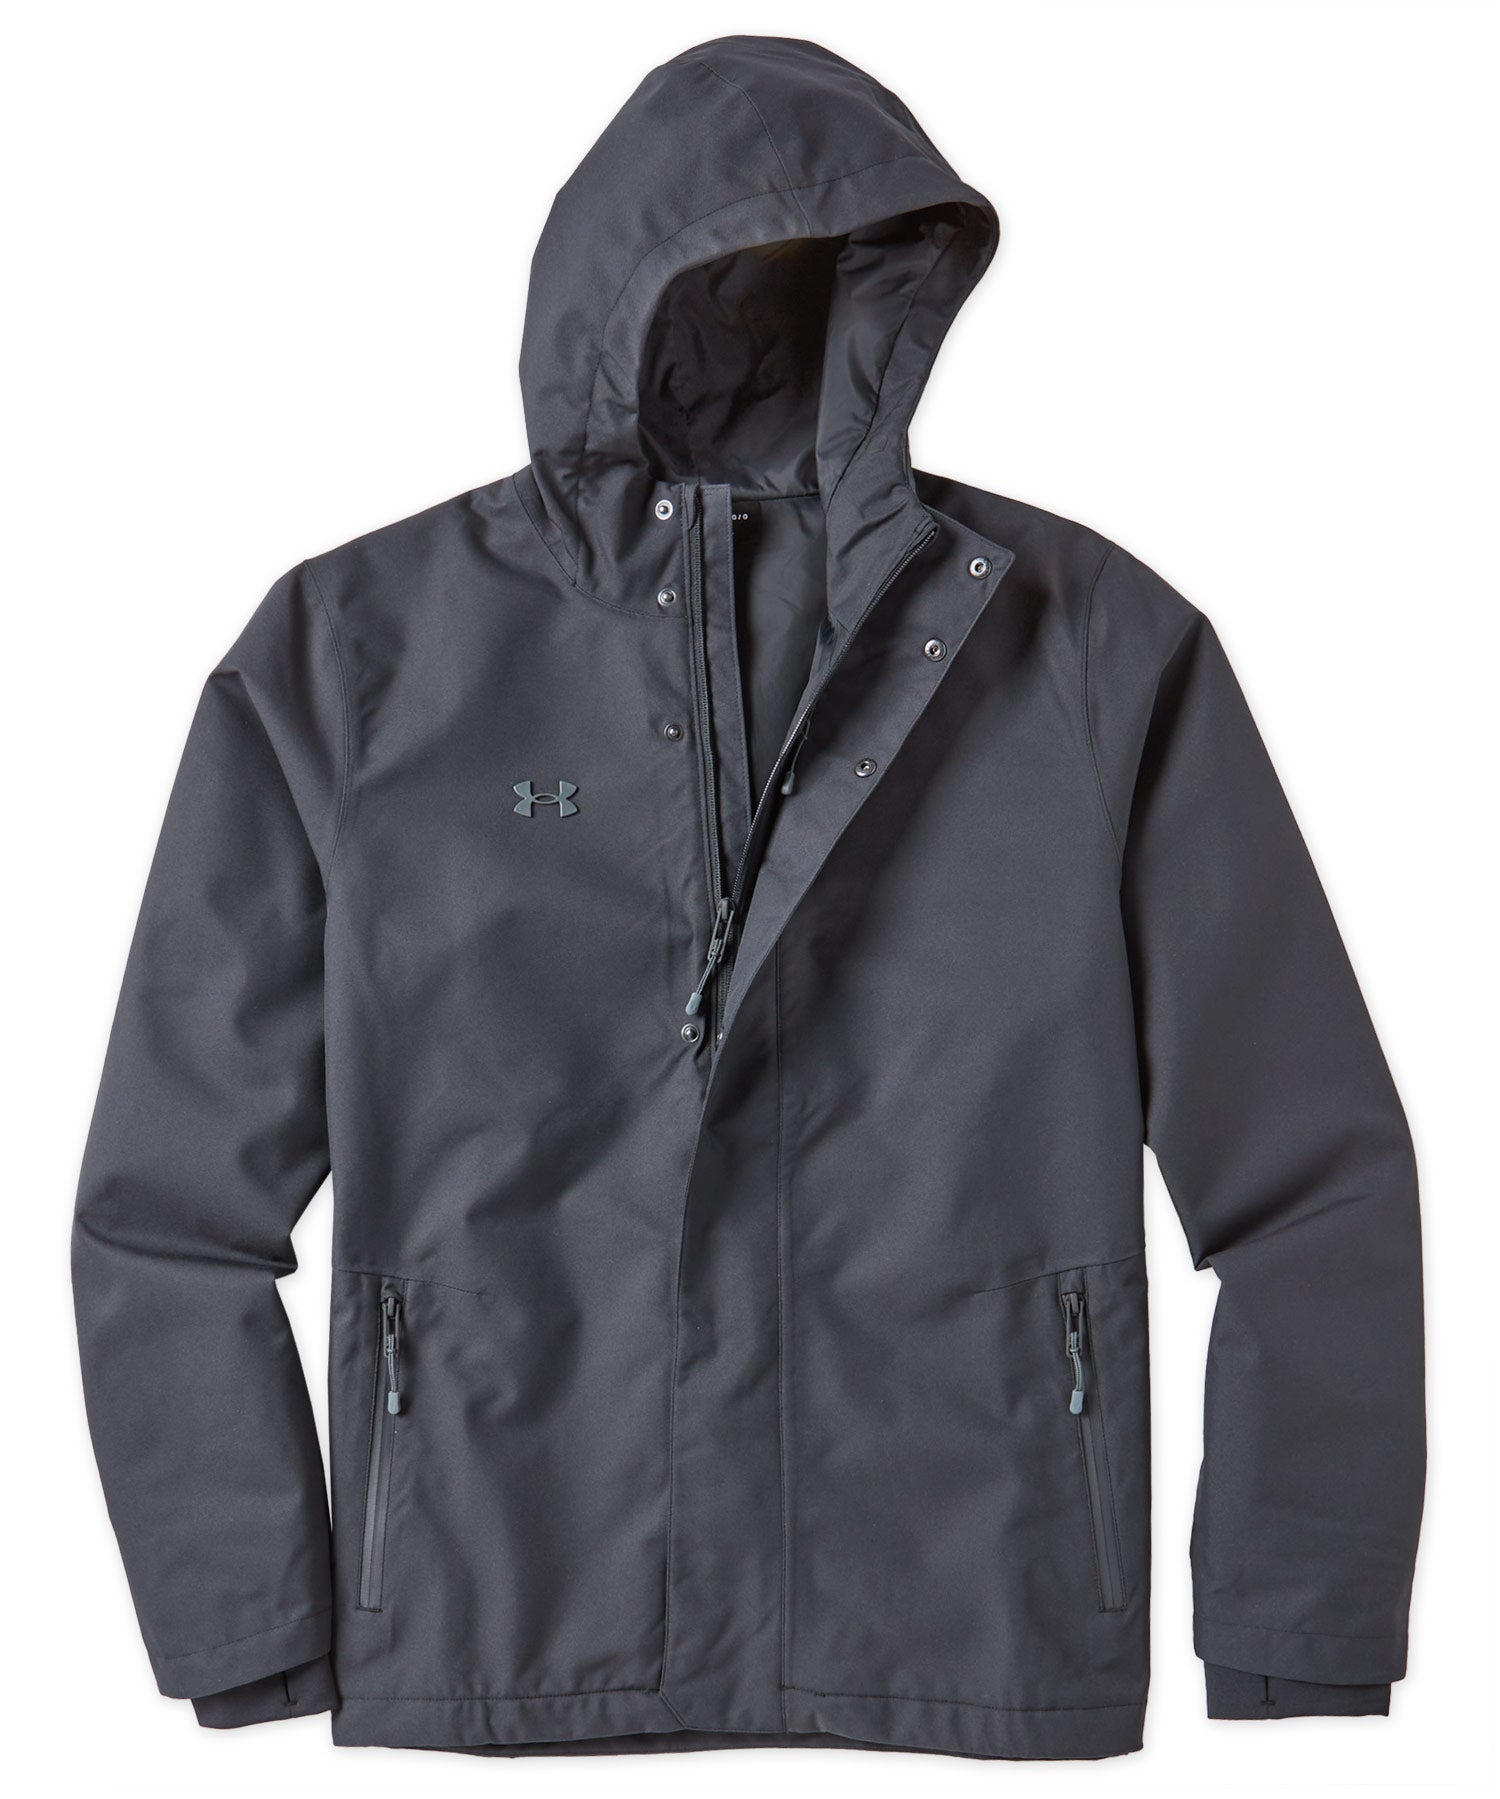 Lux Performance Jacket with Zip Sleeve Pocket